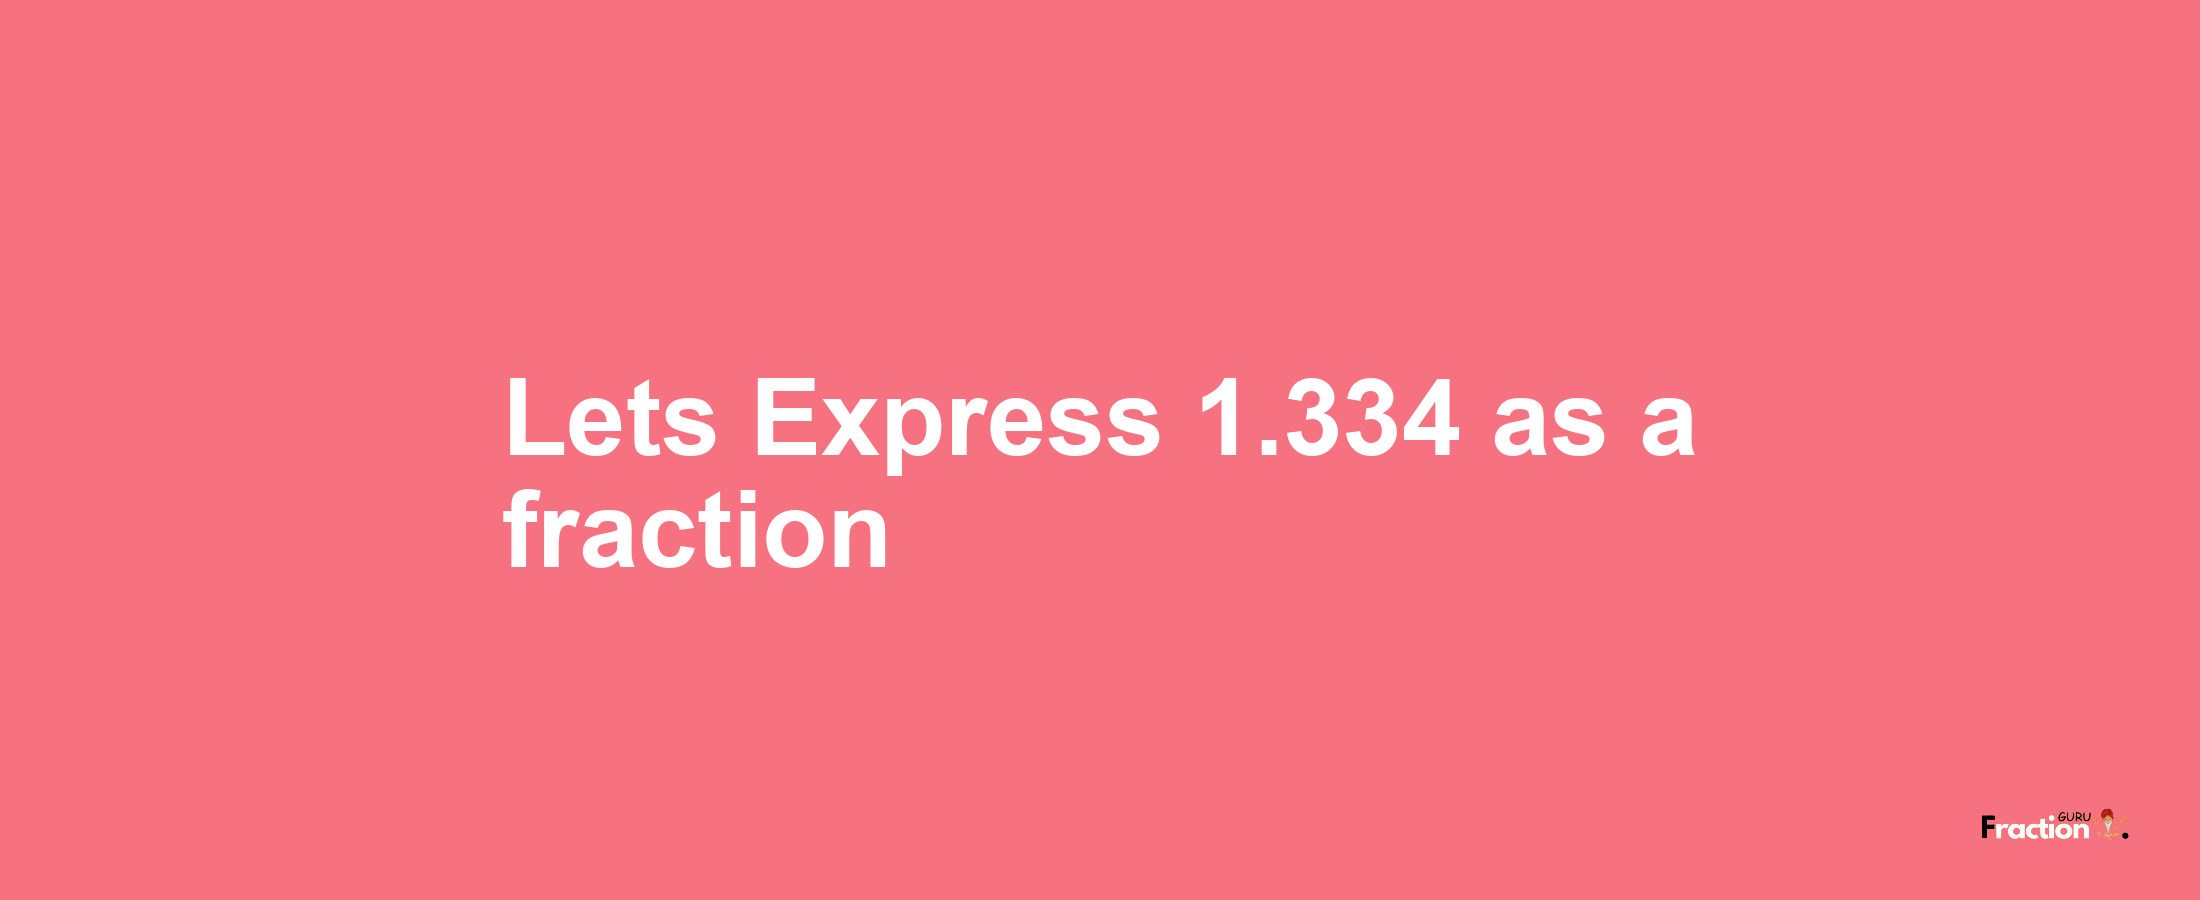 Lets Express 1.334 as afraction